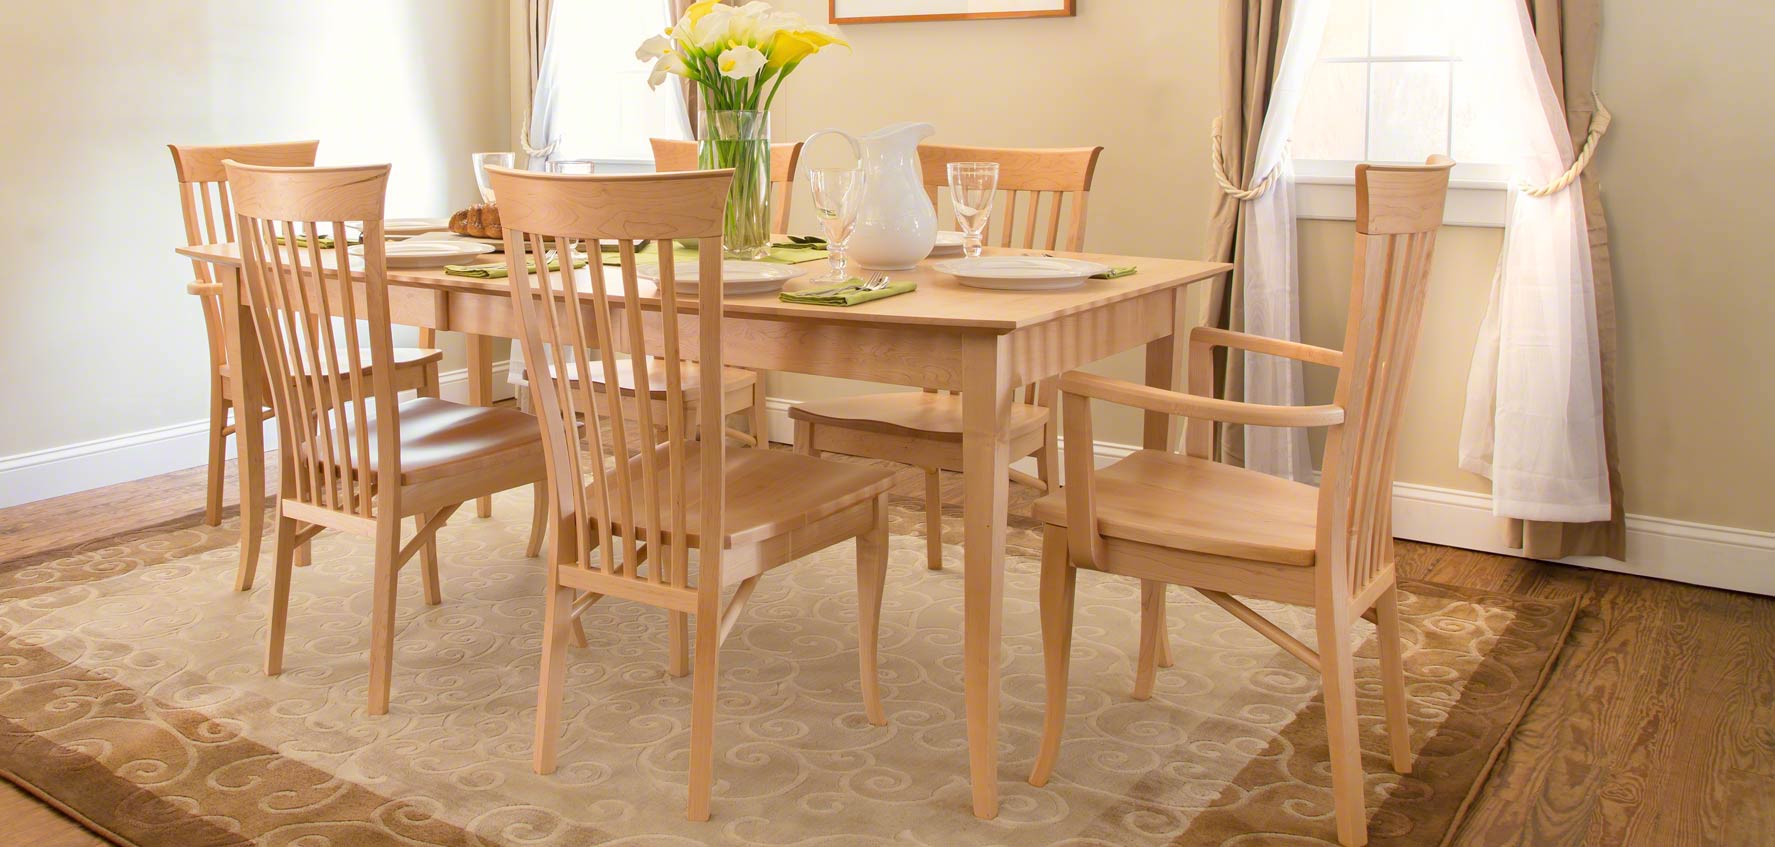 How to Change the Color of Wood Furniture